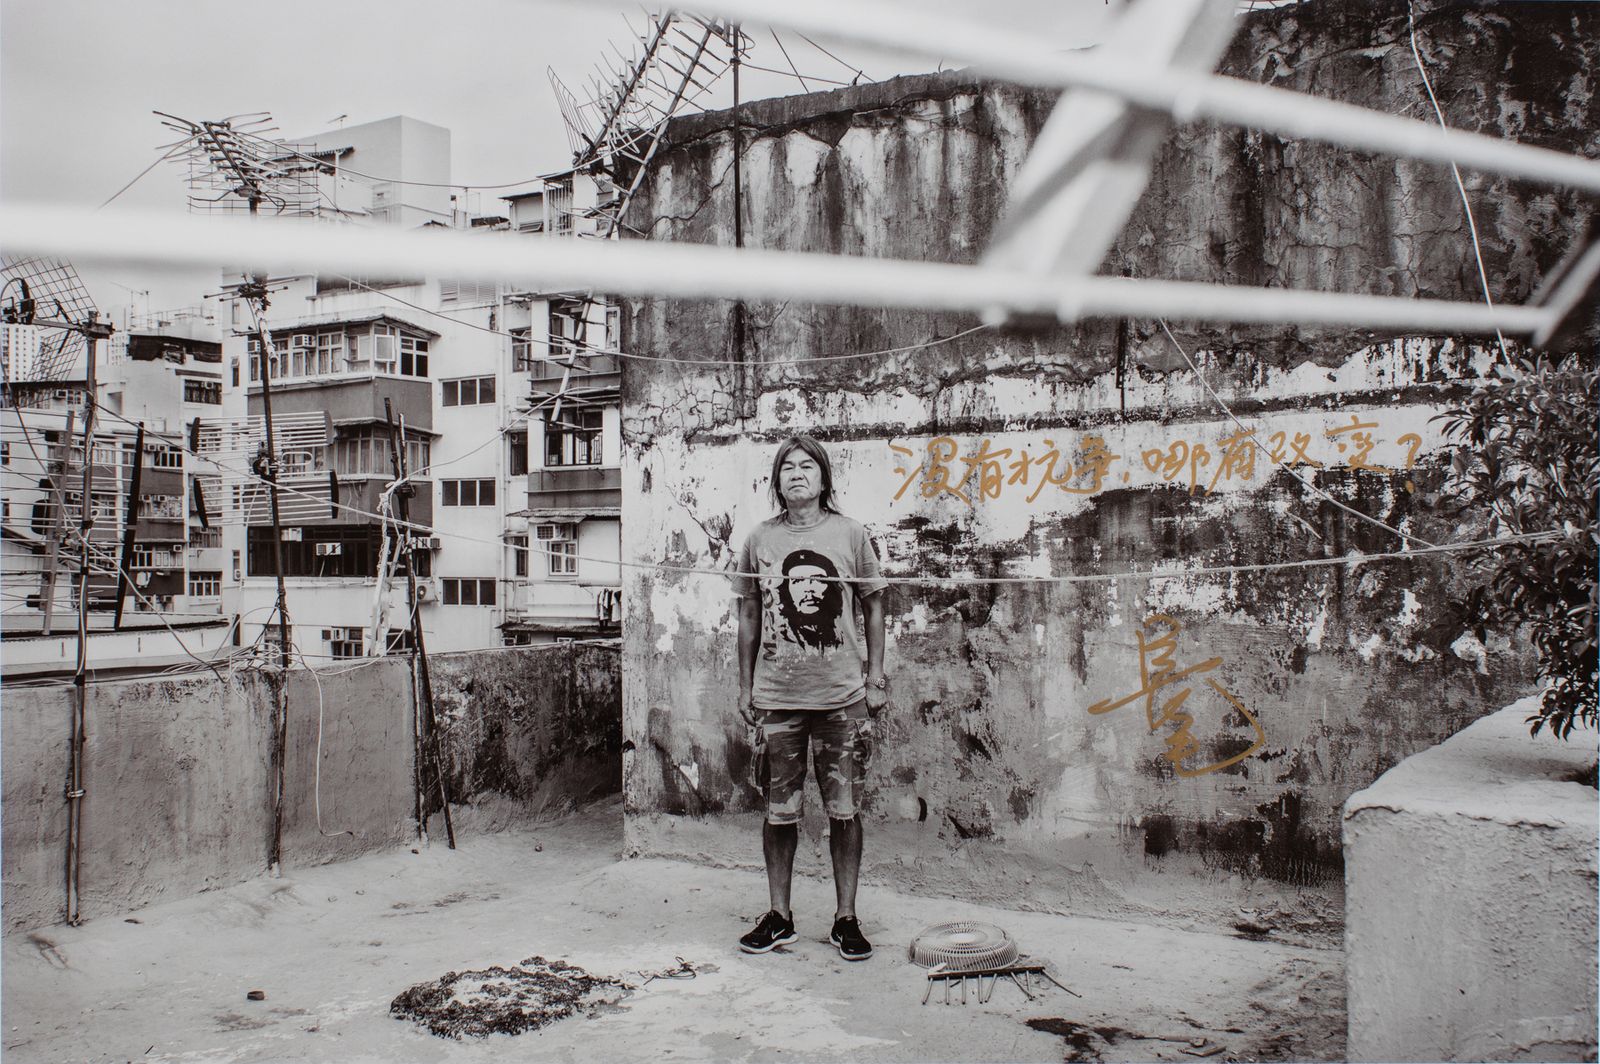 © Todd Darling - Image from the Portrait of Hong Kong photography project